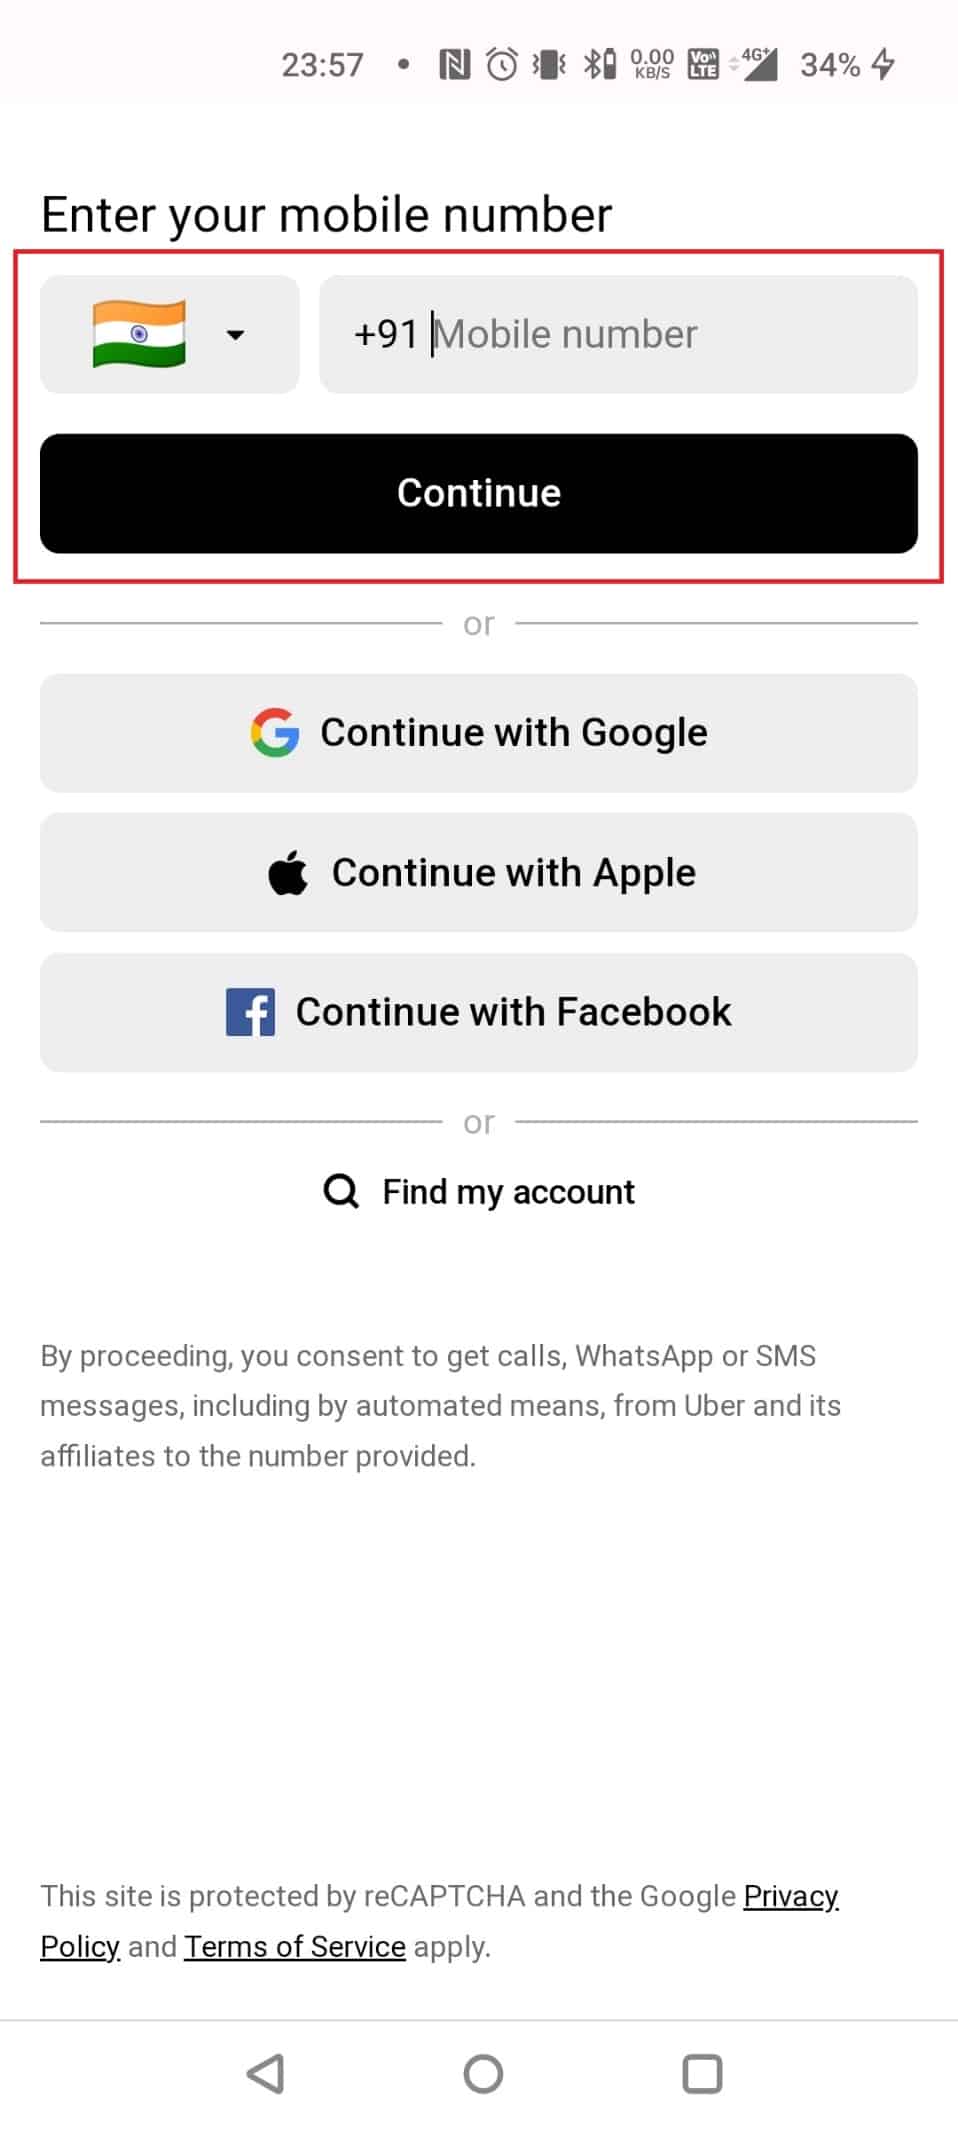 Enter your mobile number and tap on Continue